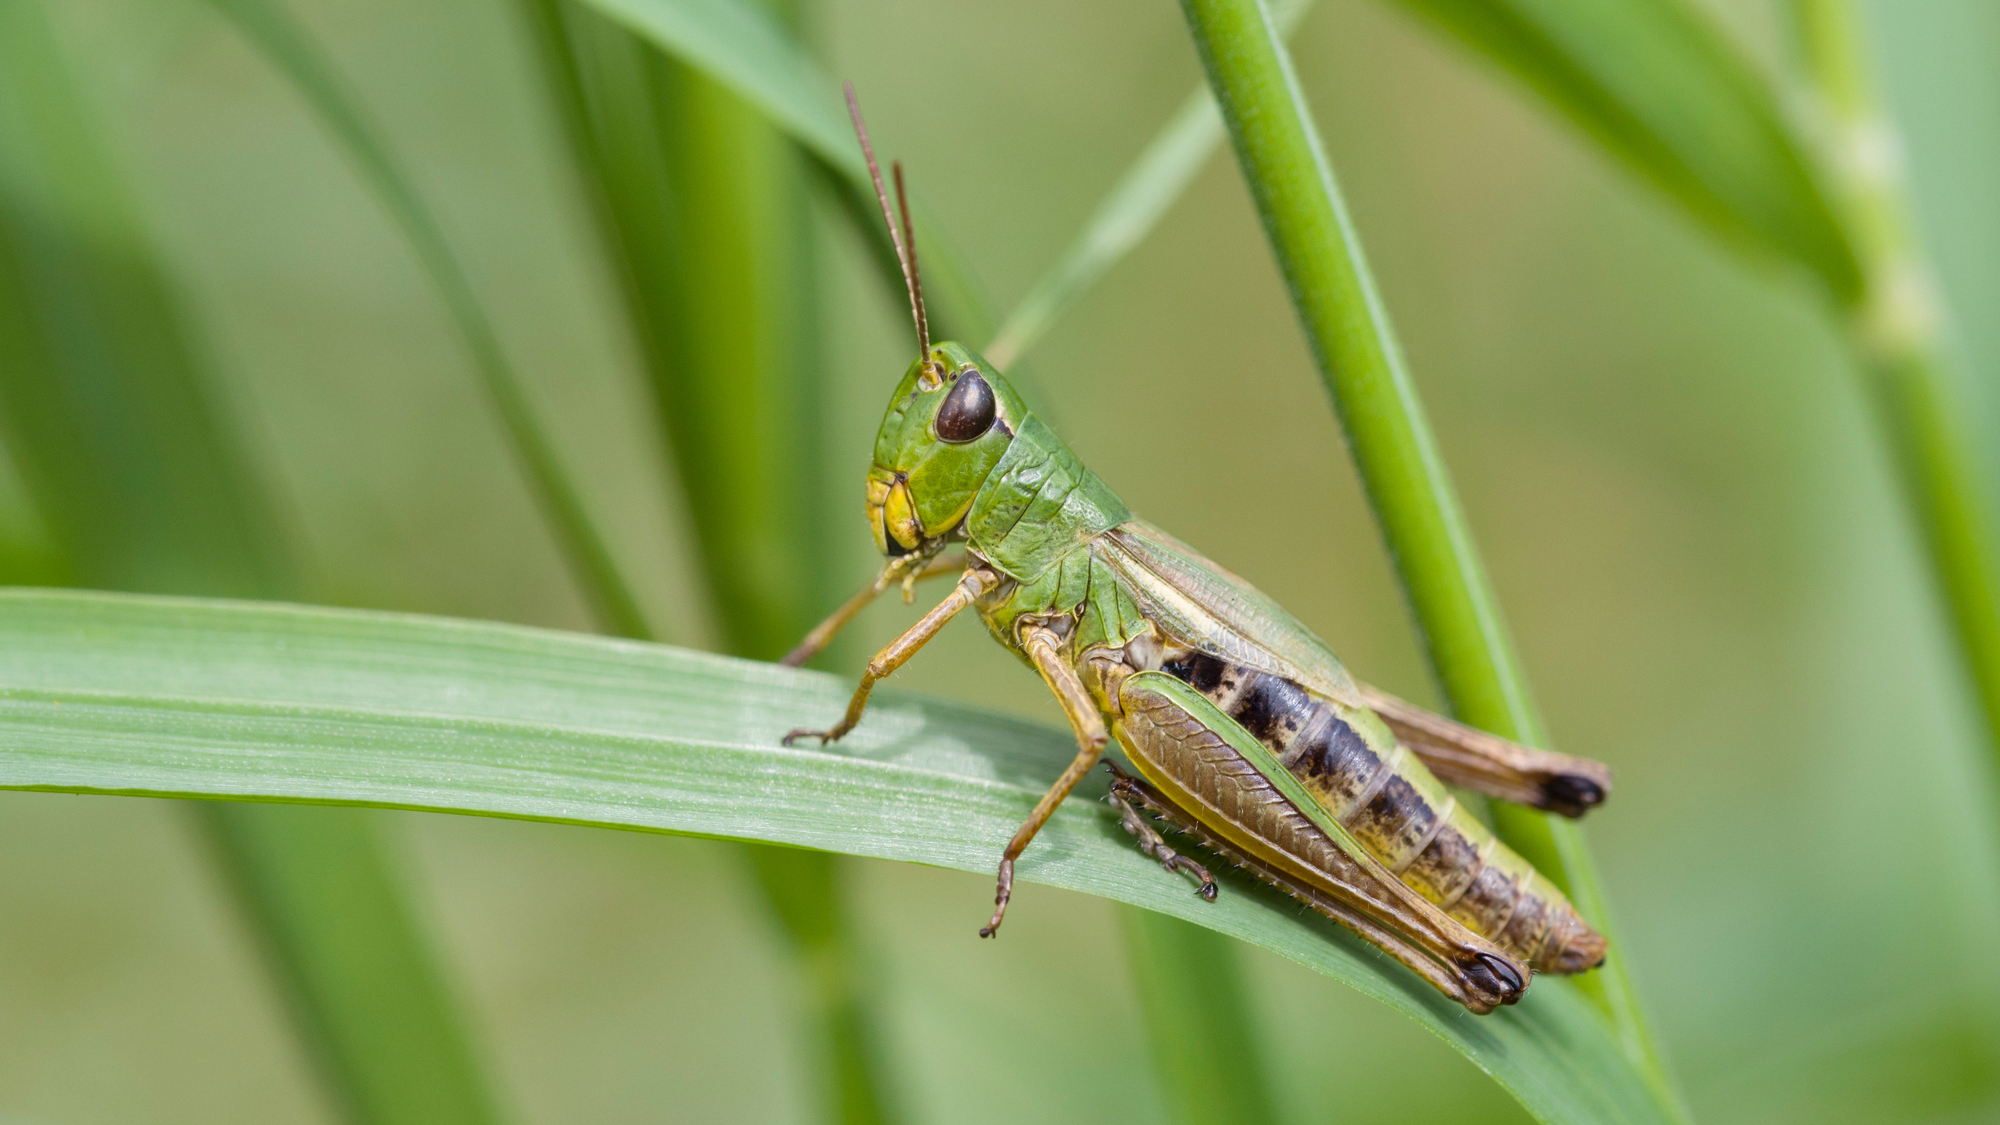 Leaping robots take physics lessons from grasshoppers